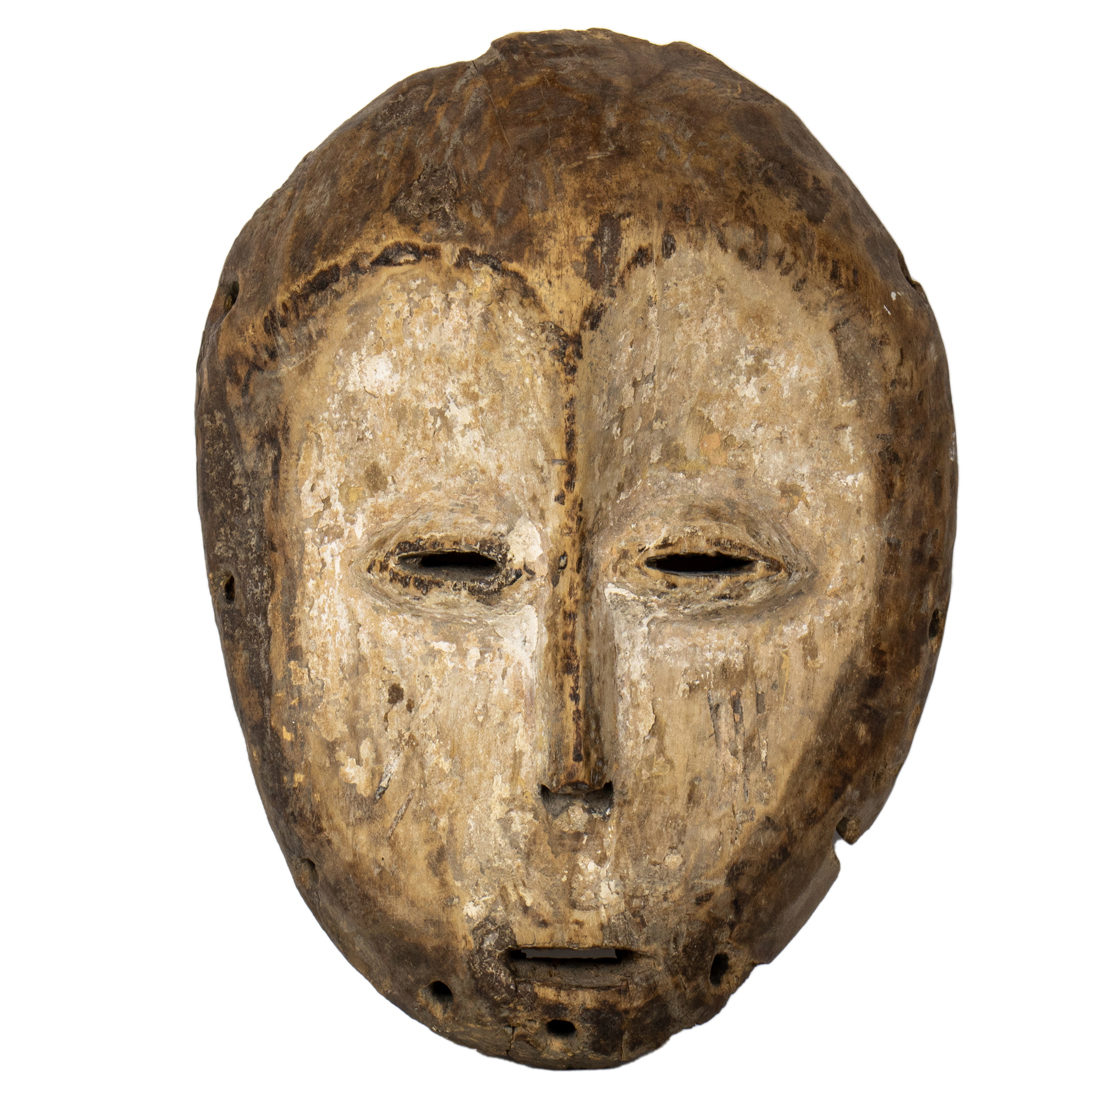 LEGA MASK WITH PAINTED DETAILS